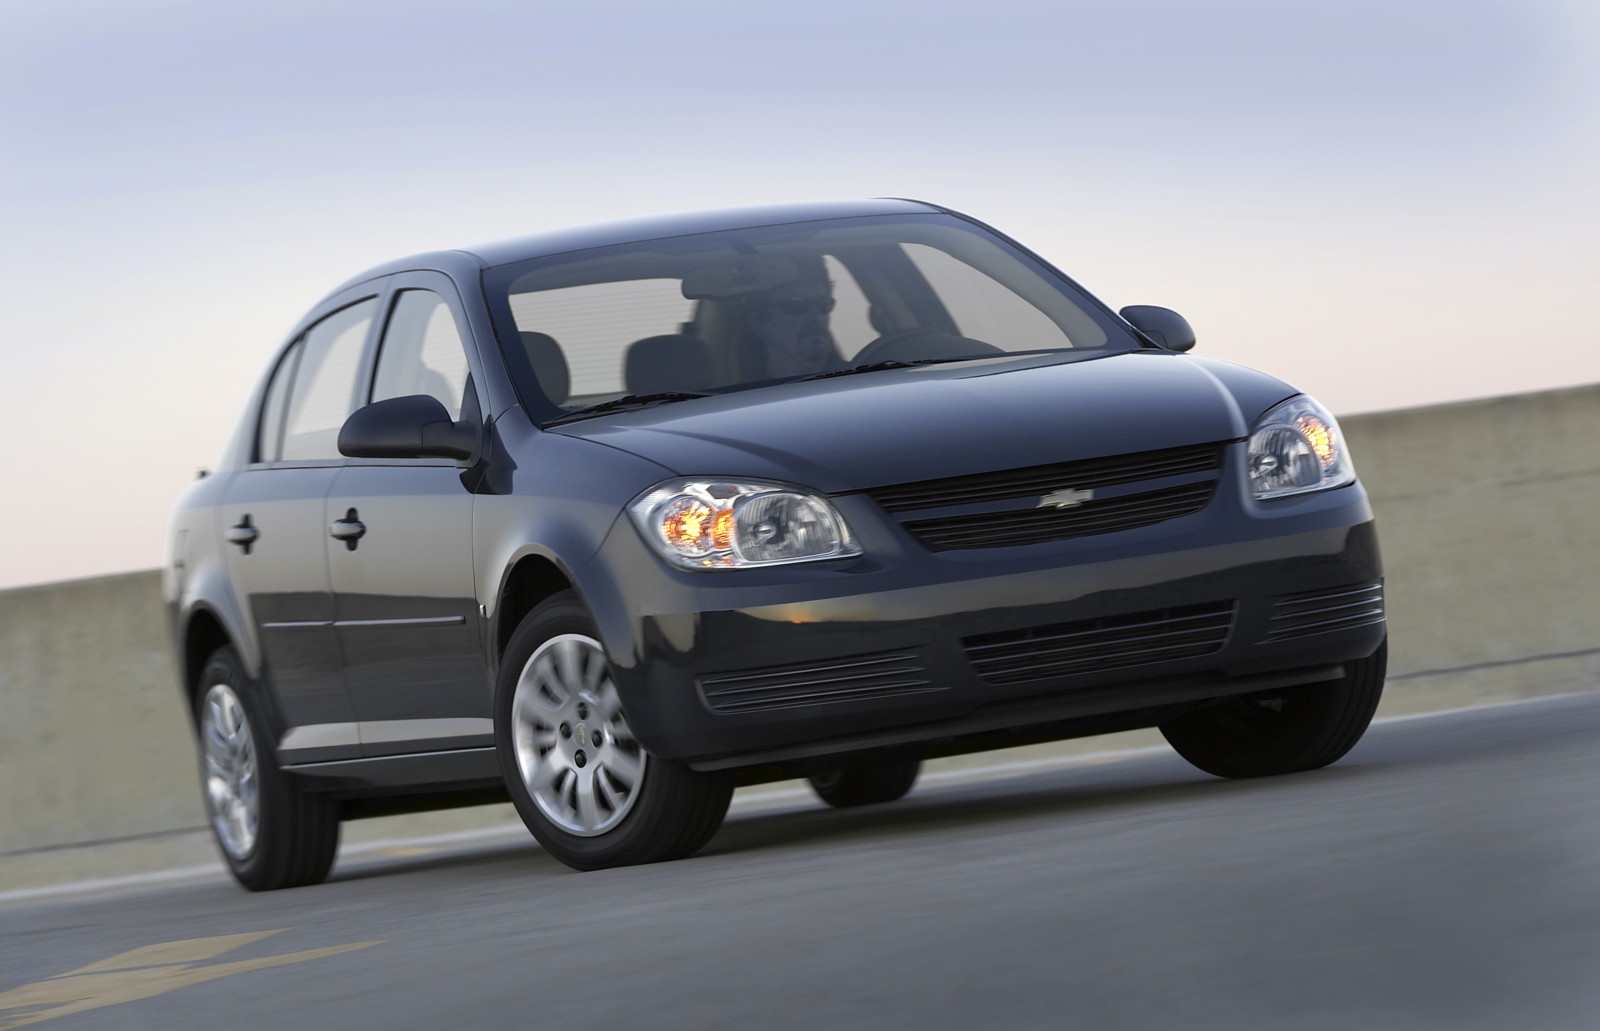 2010 Chevrolet Cobalt Chevy Review Ratings Specs Prices